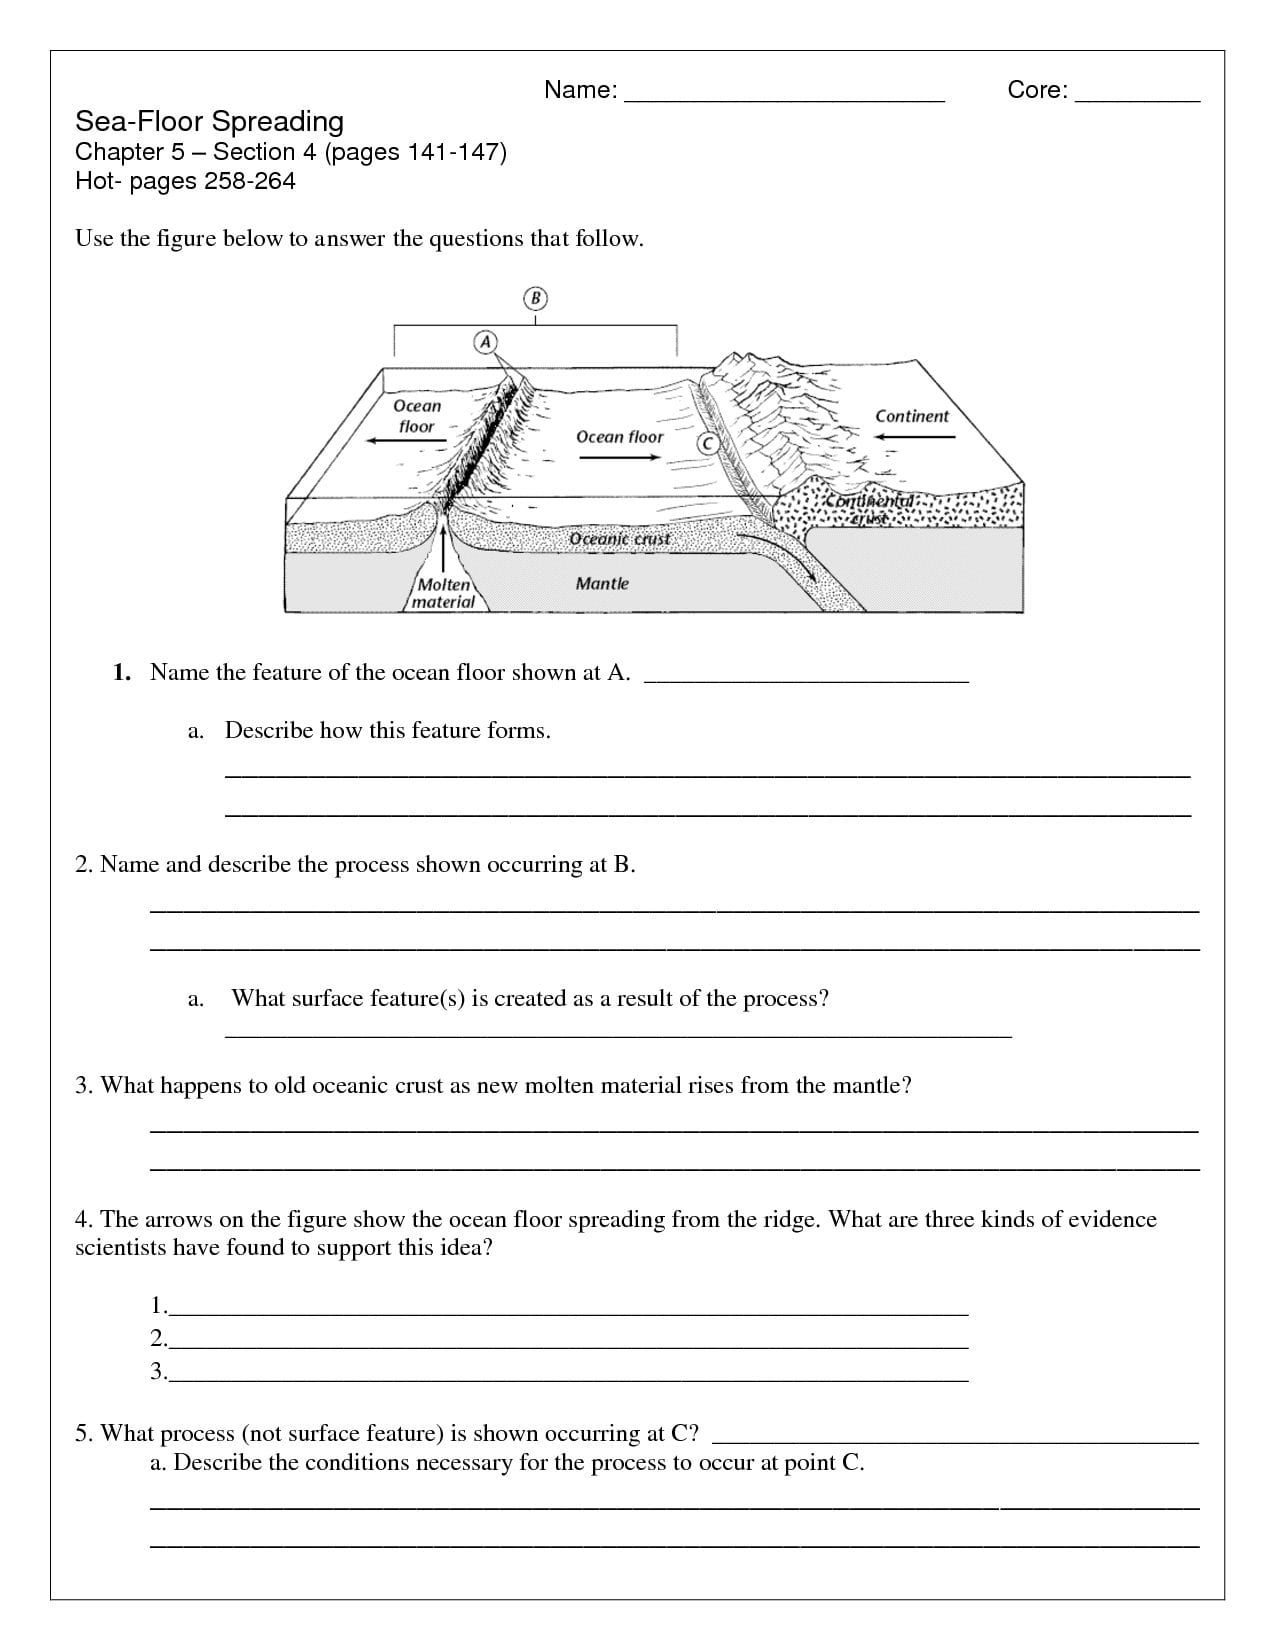 sea-floor-spreading-worksheet-pearson-education-answers-qeducationz